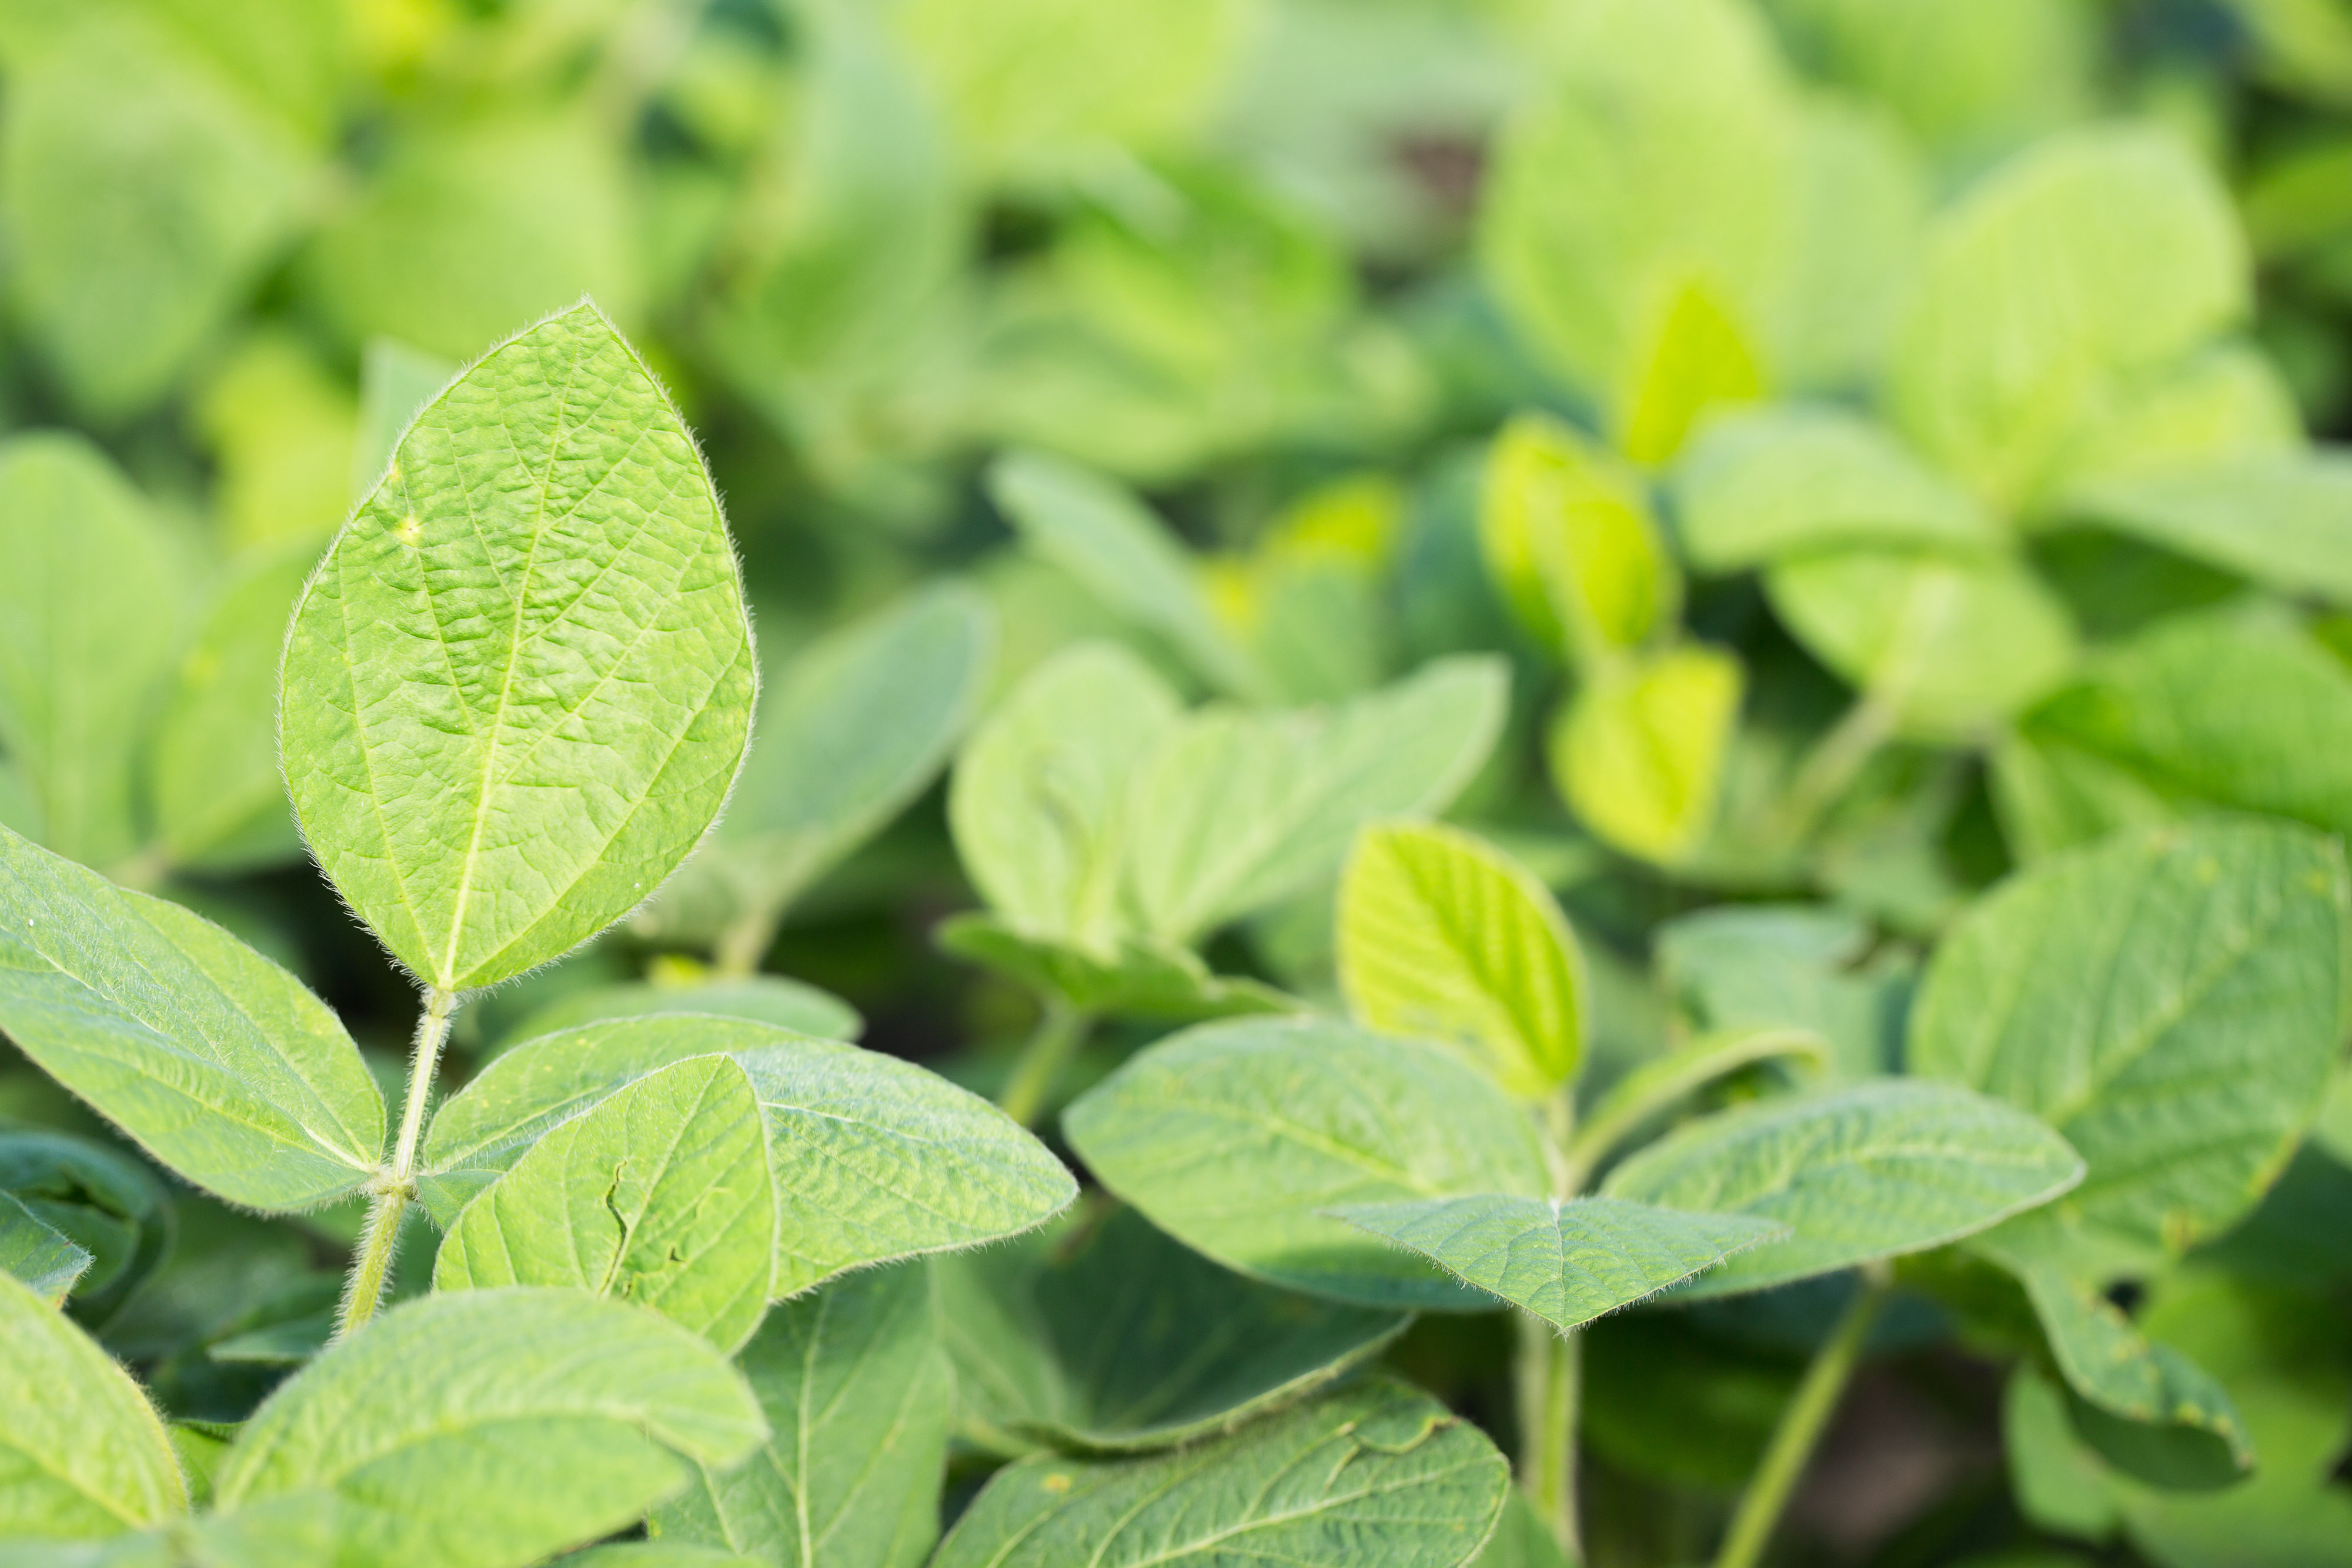 Soybeans – Good for Lowering Greenhouse Gas Emissions